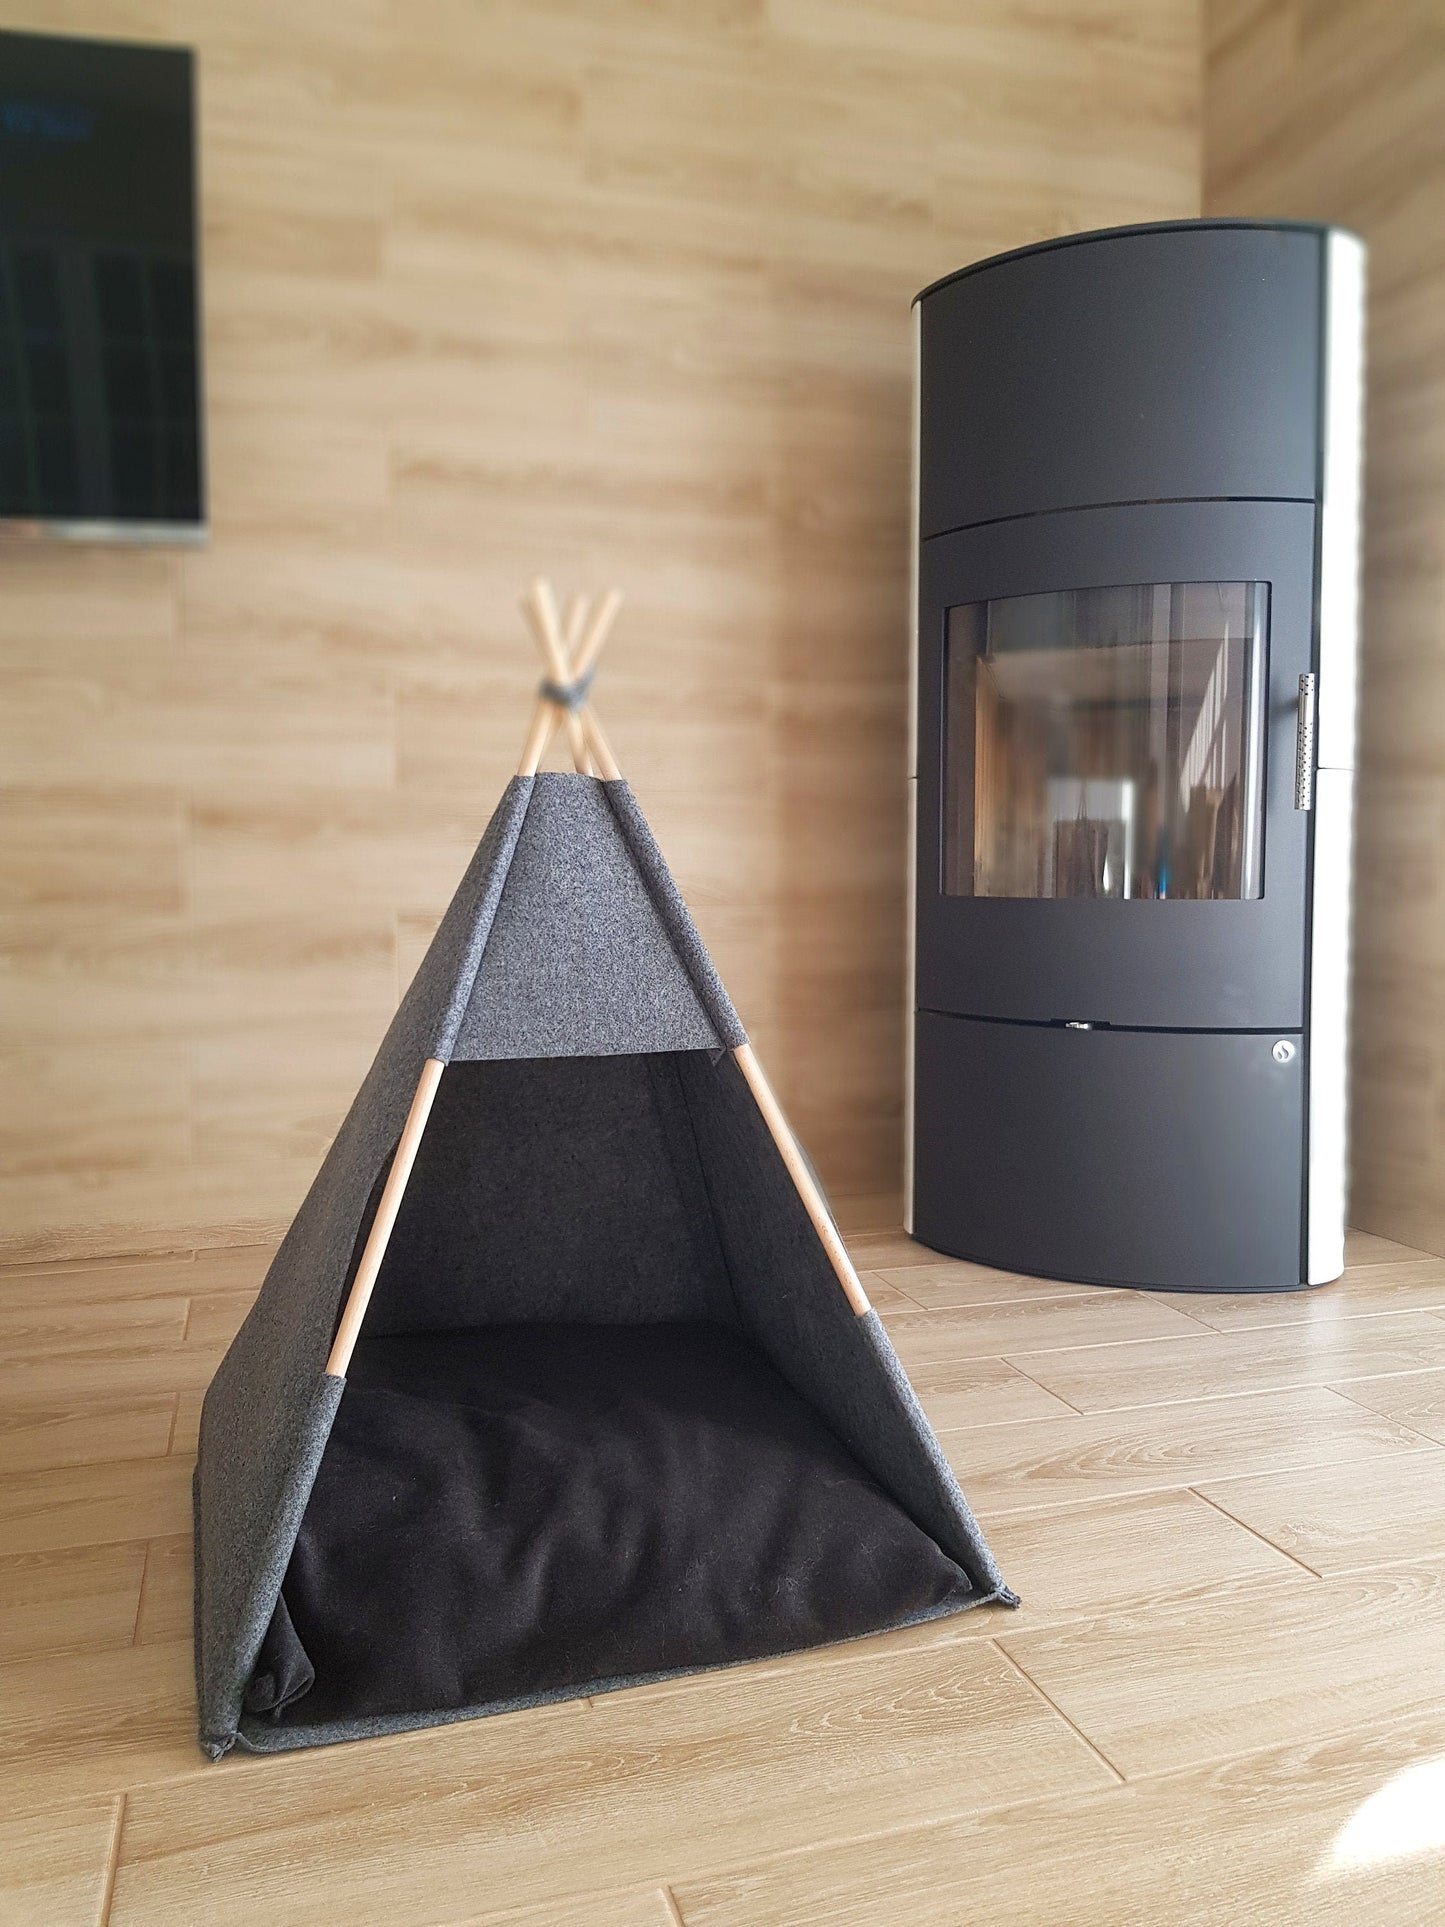 puppy bed, dog house, Teepee personalized dog bed, Pup tent, Grey soft eco-friendly felt of a strong form cozy relax House bunny dog bed cat